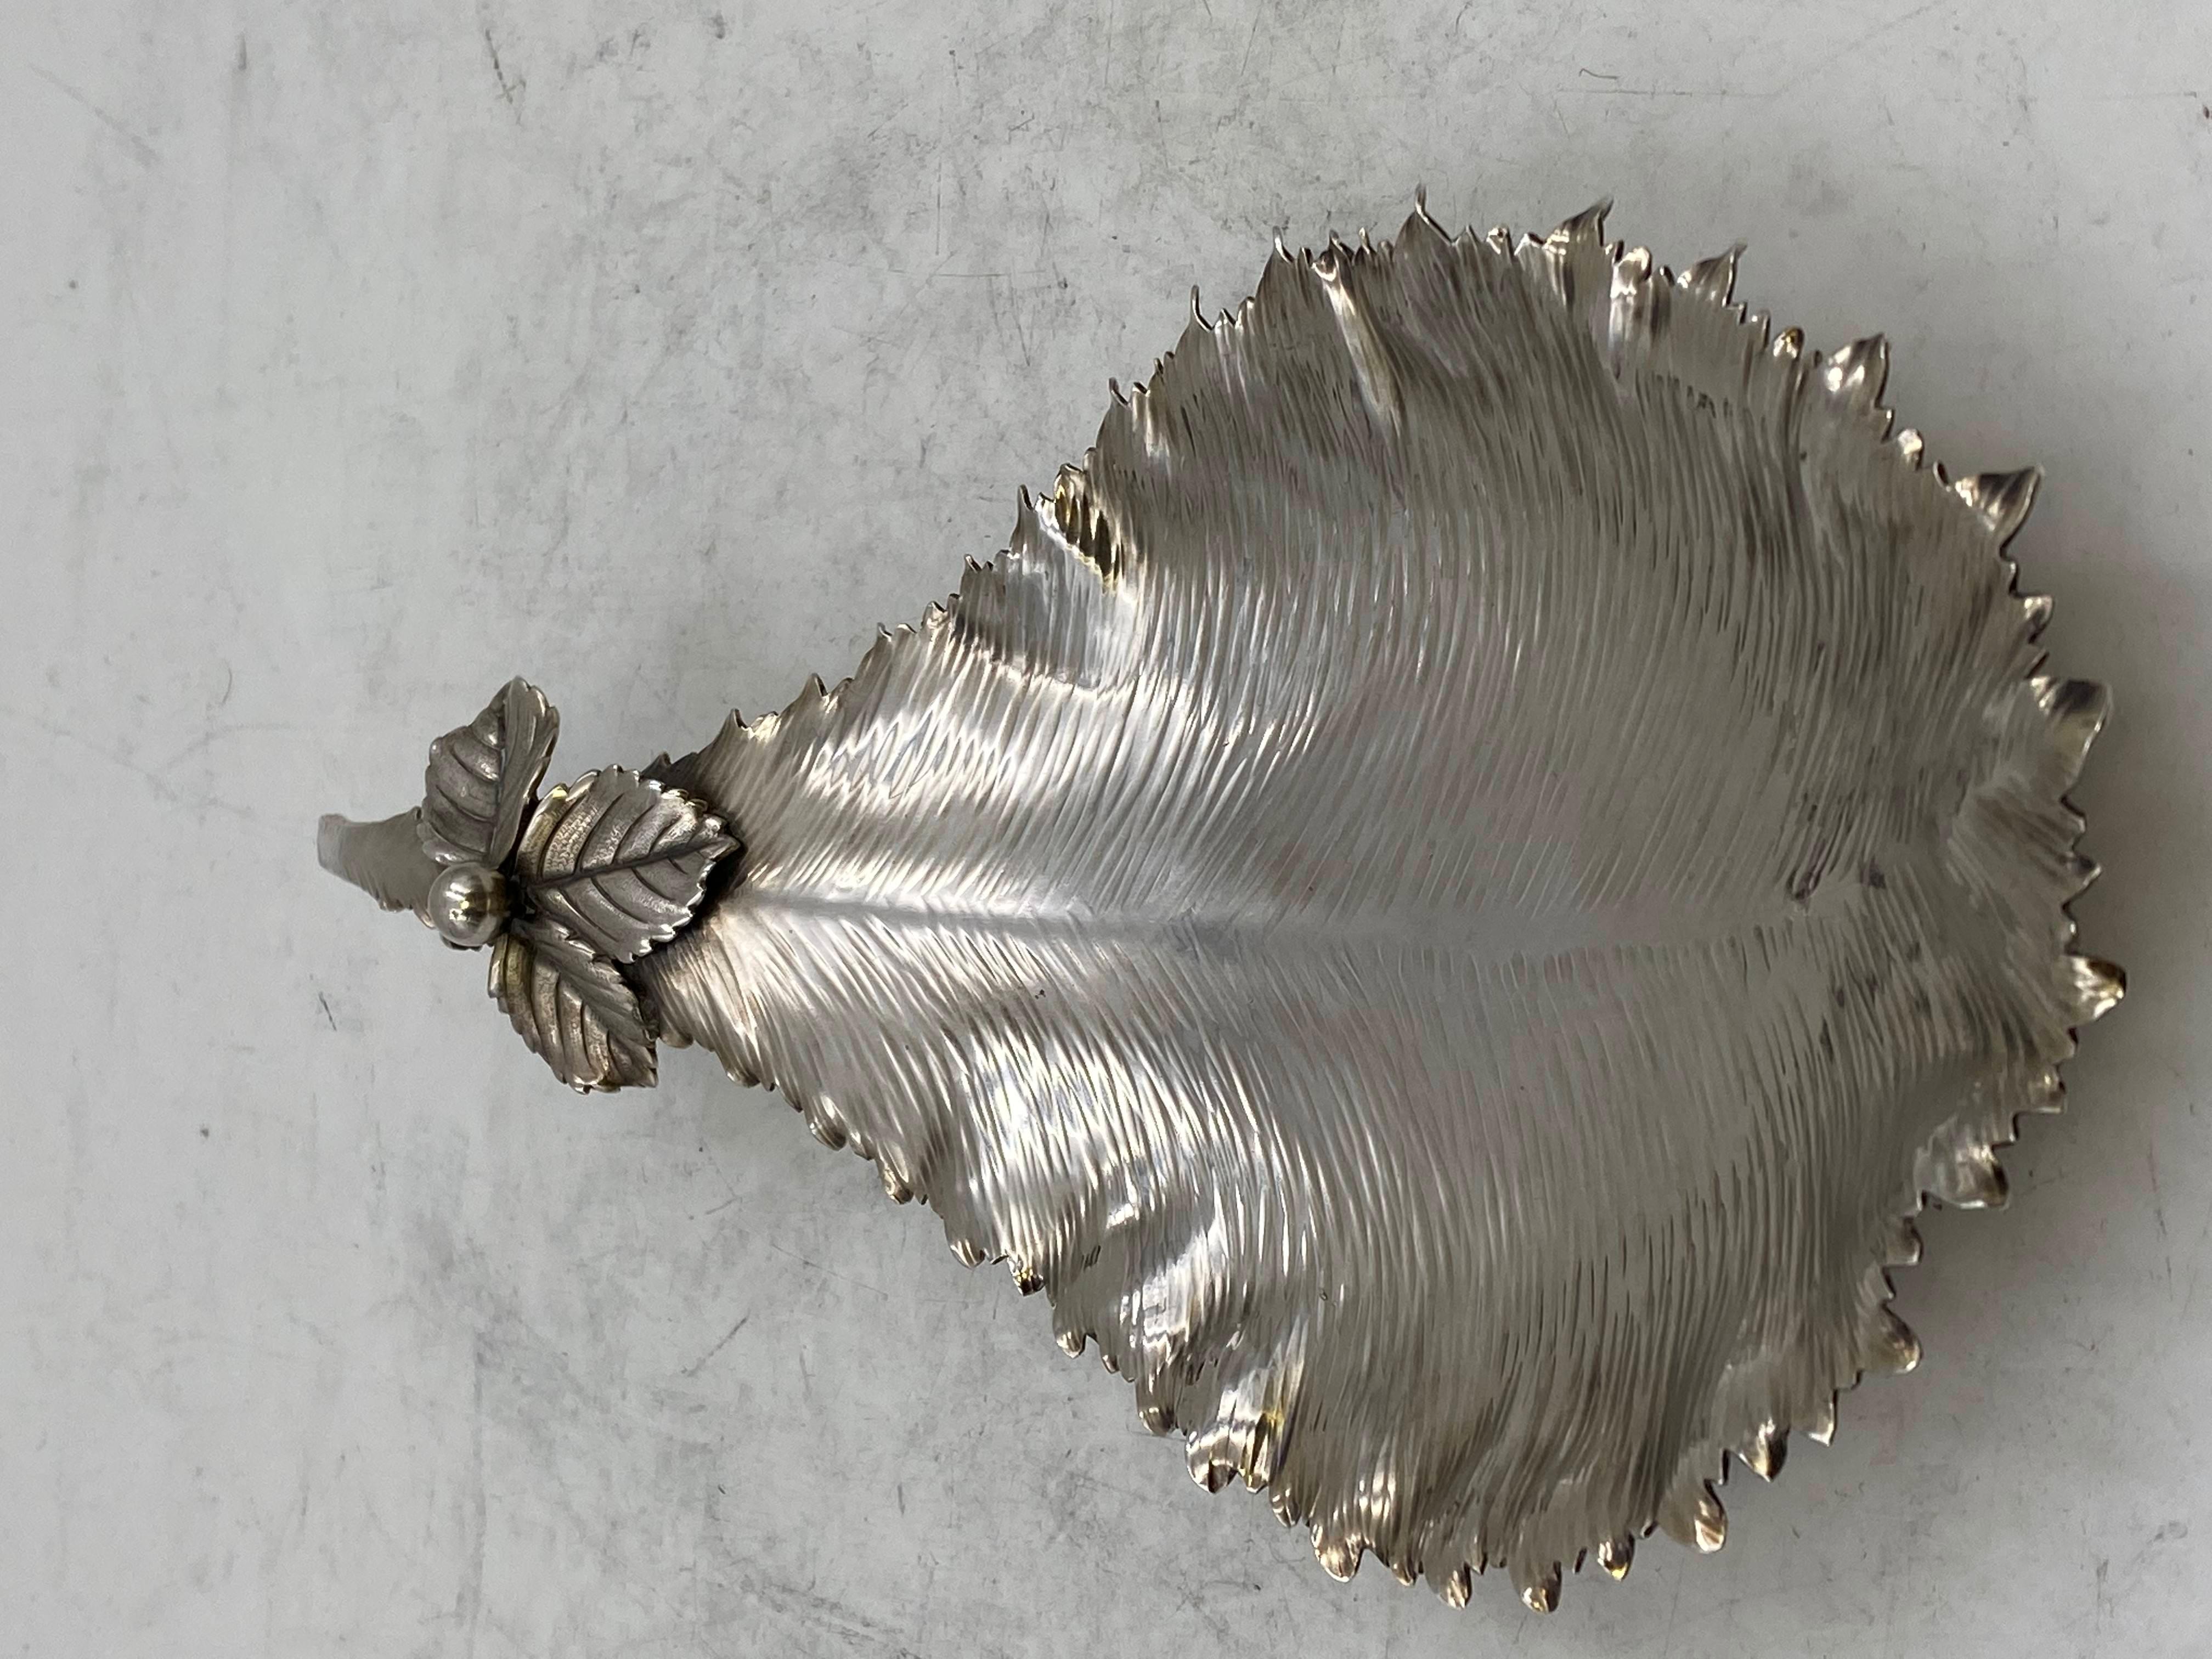 Rare sterling silver dish in leaf shape with applied leaves at the handle standing on 3 shell-shaped motifs by Gorham dating back to 1882. Measuring 10” in length, 4 ¾” in width at the largest point, and 1” in height and weighing 6 ozt. Pattern